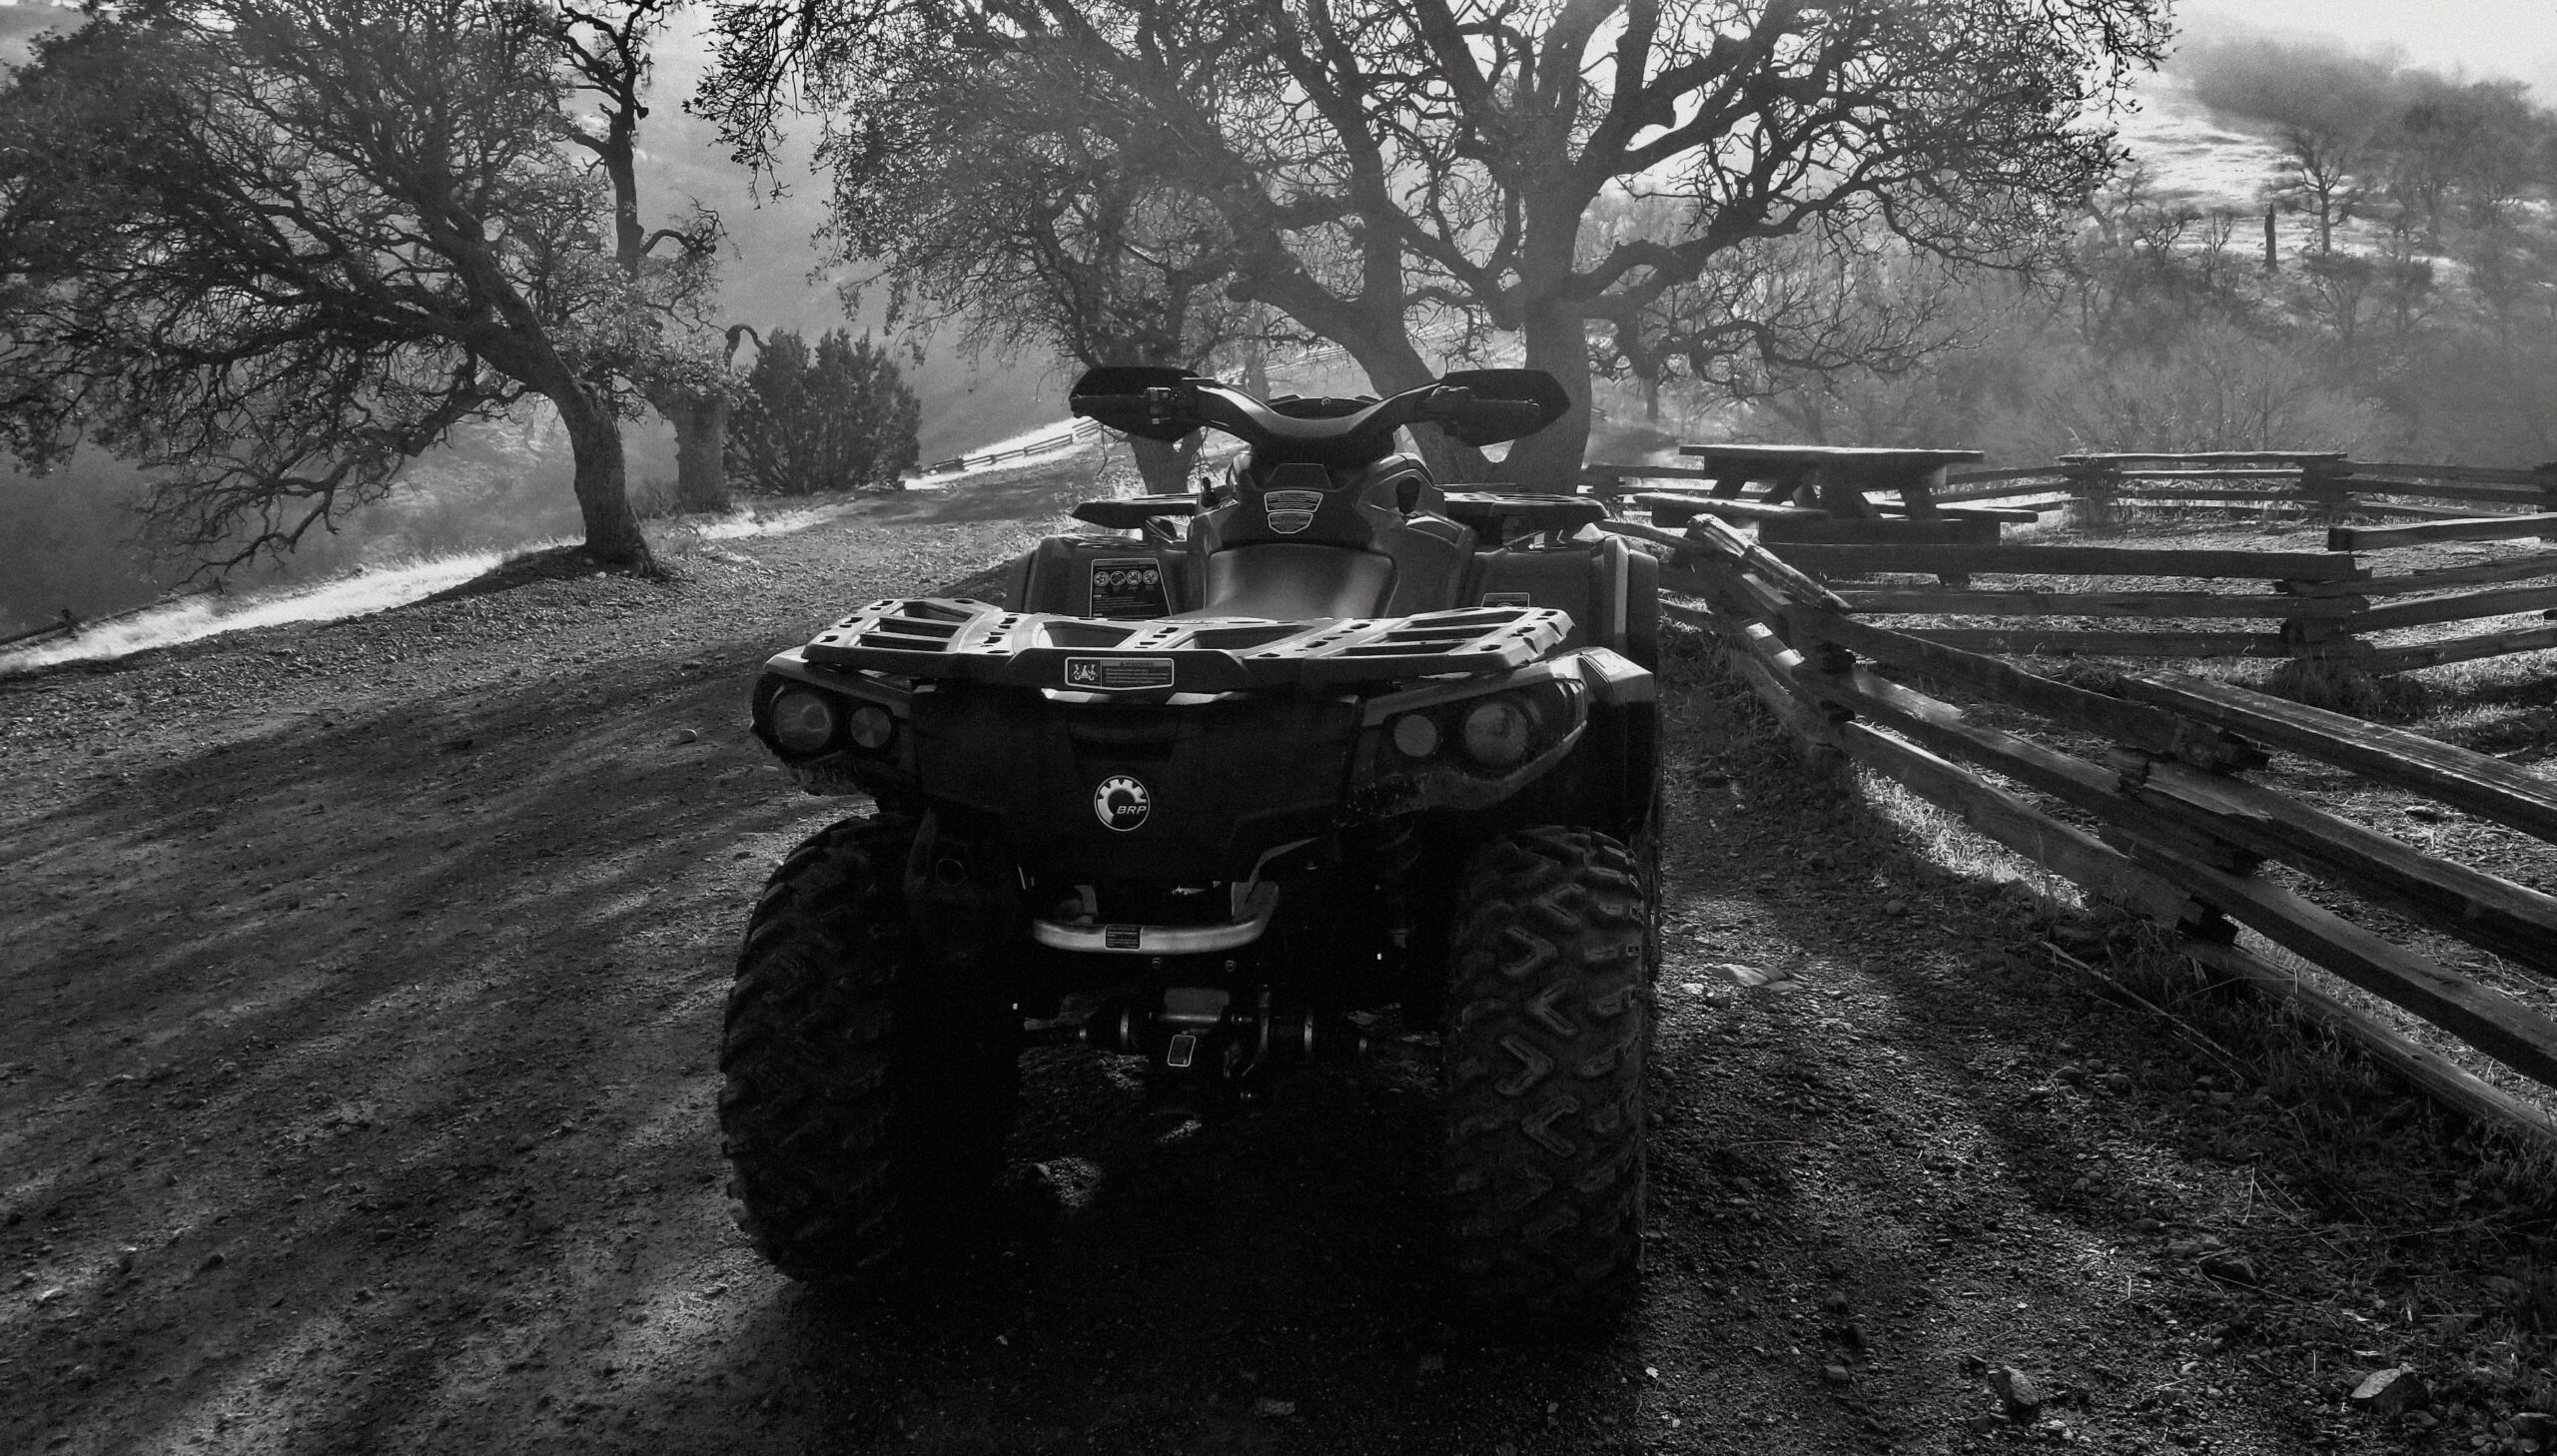 This is a picture of the Polaris Ranger 700 XP in black and white sitting in mud.